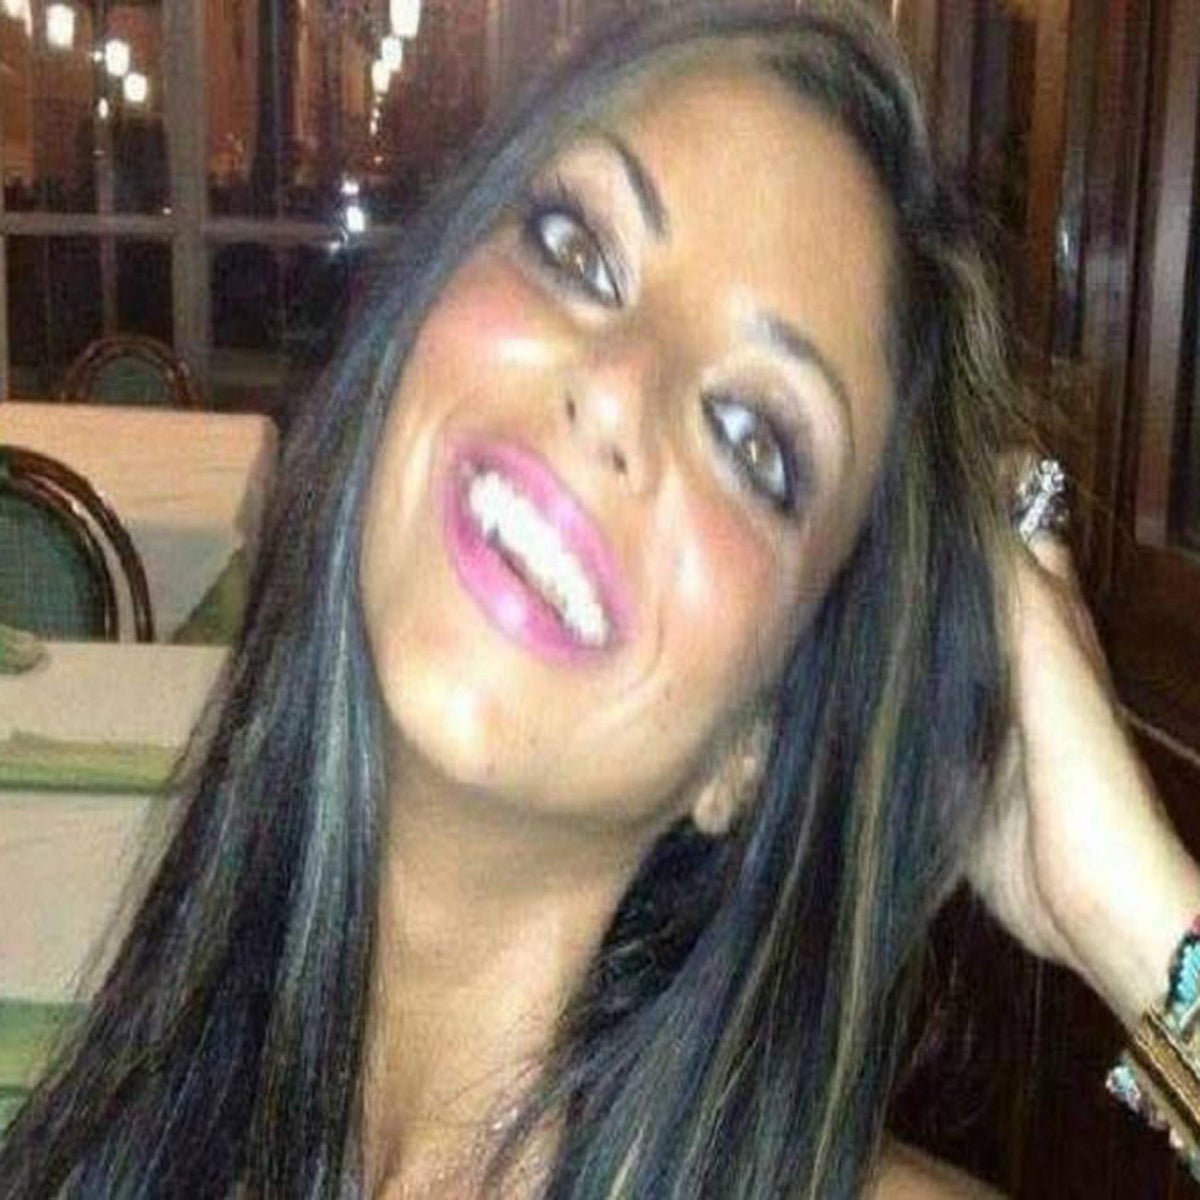 Investigation launched into death of Italian woman who killed herself after  explicit images went viral | The Independent | The Independent